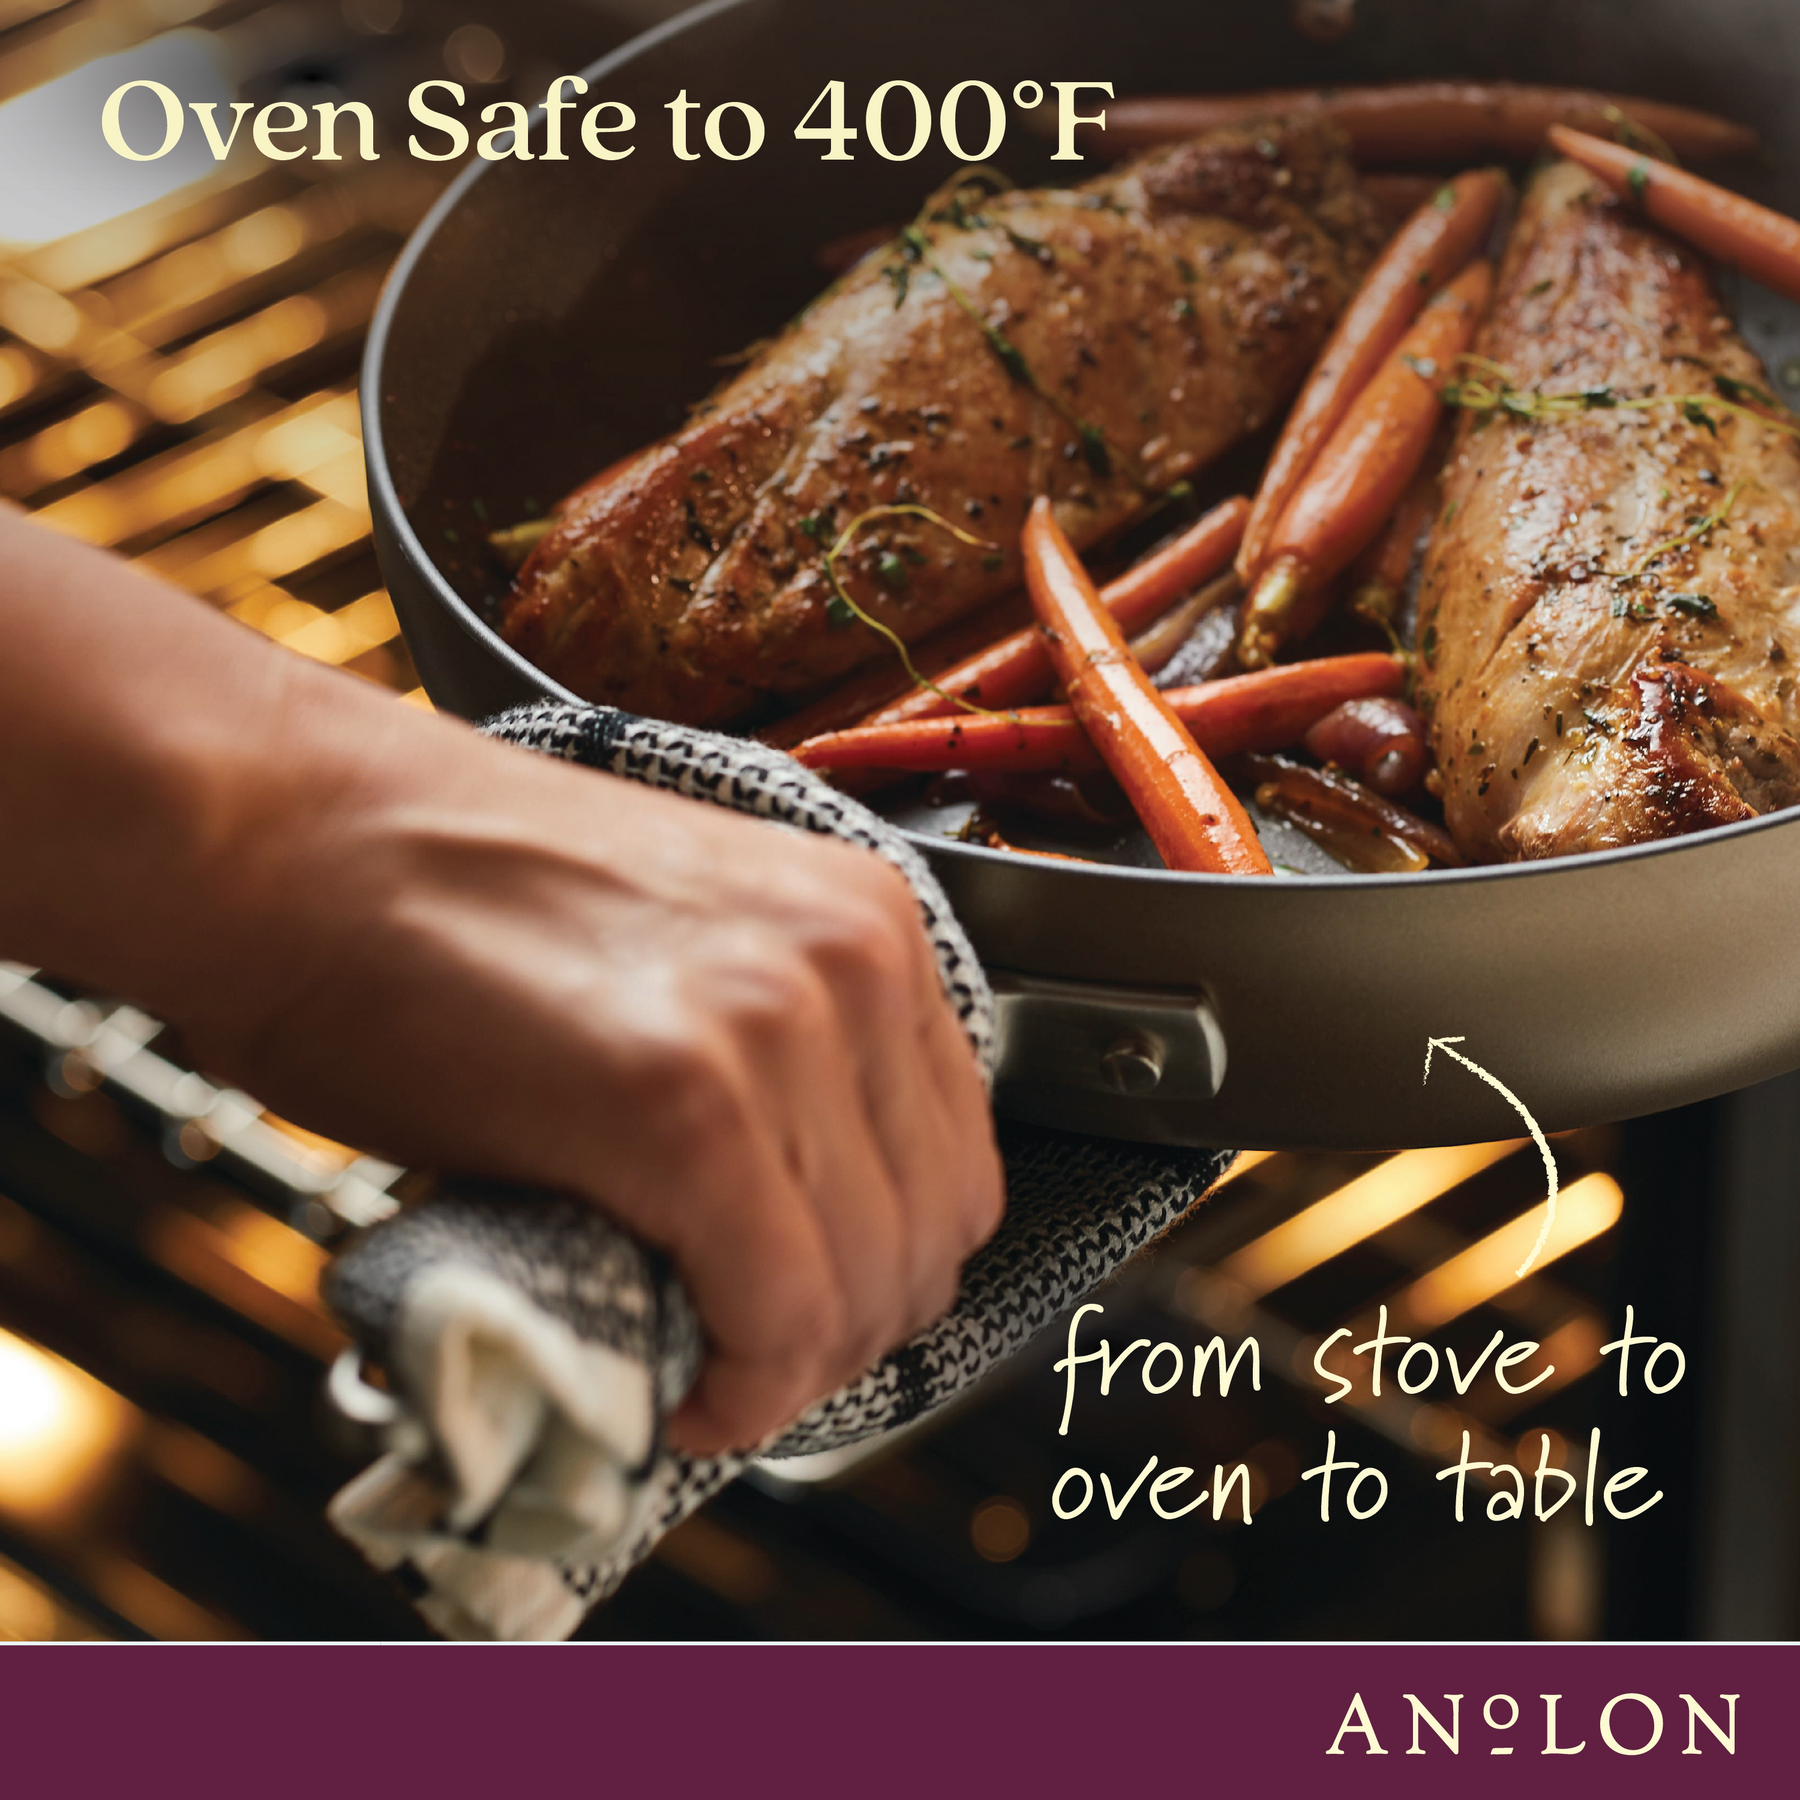 Anolon Advanced Home Hard-Anodized Nonstick 3-Piece Cookware Set in Moonstone